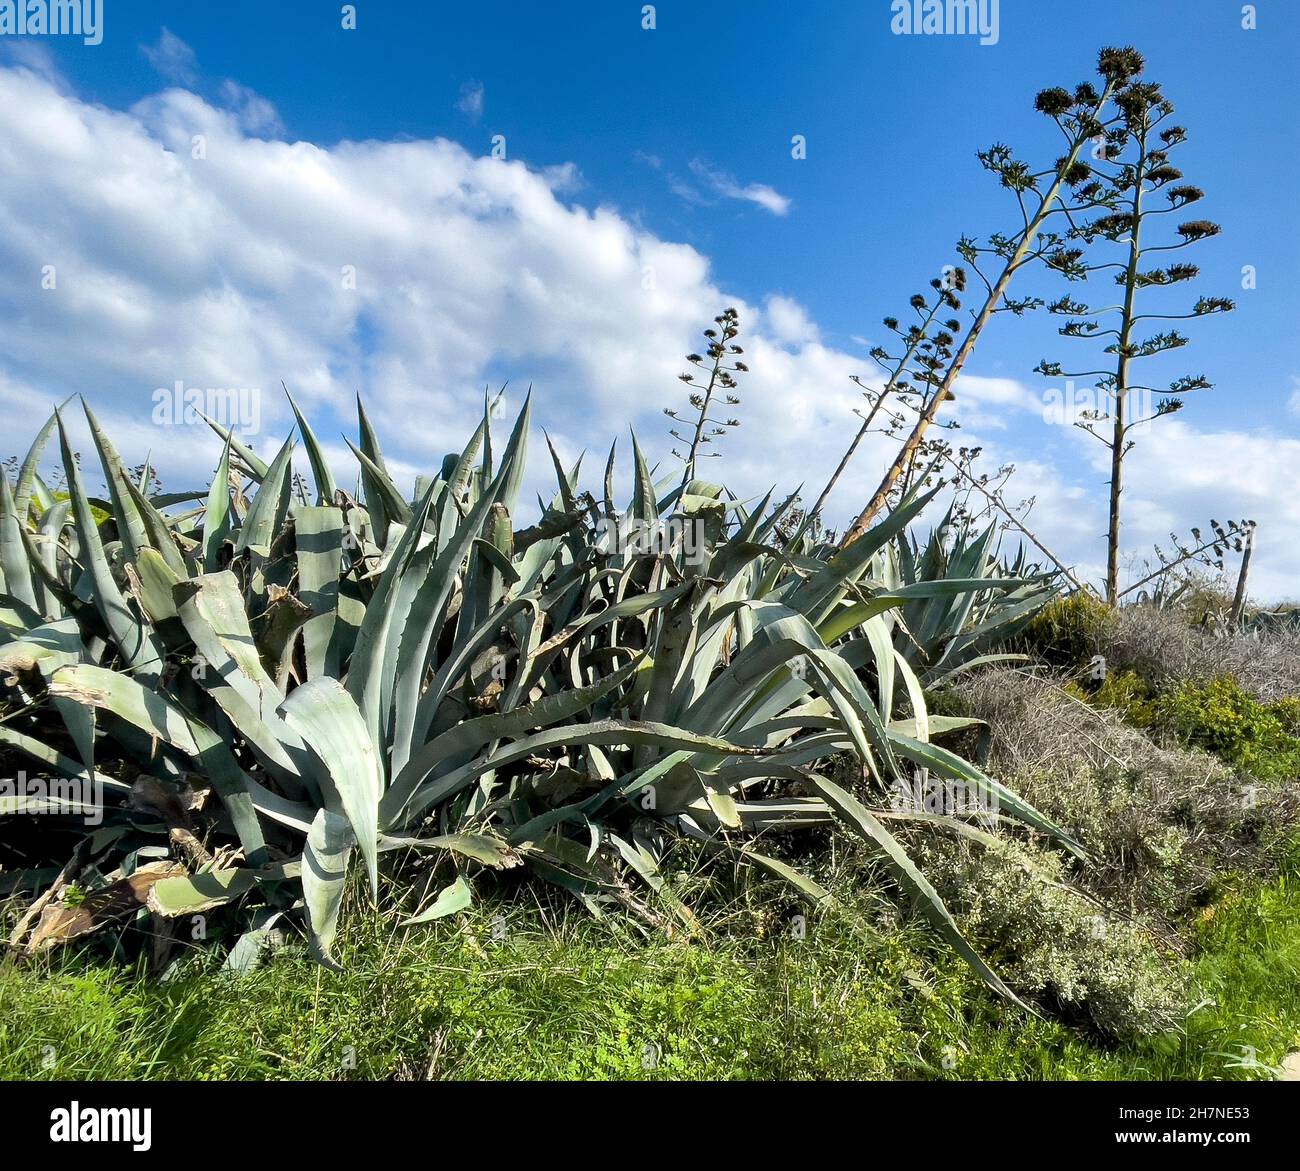 Amerikanische Agaven (Agave americana), Insel Gozo, Malte, Europa Banque D'Images